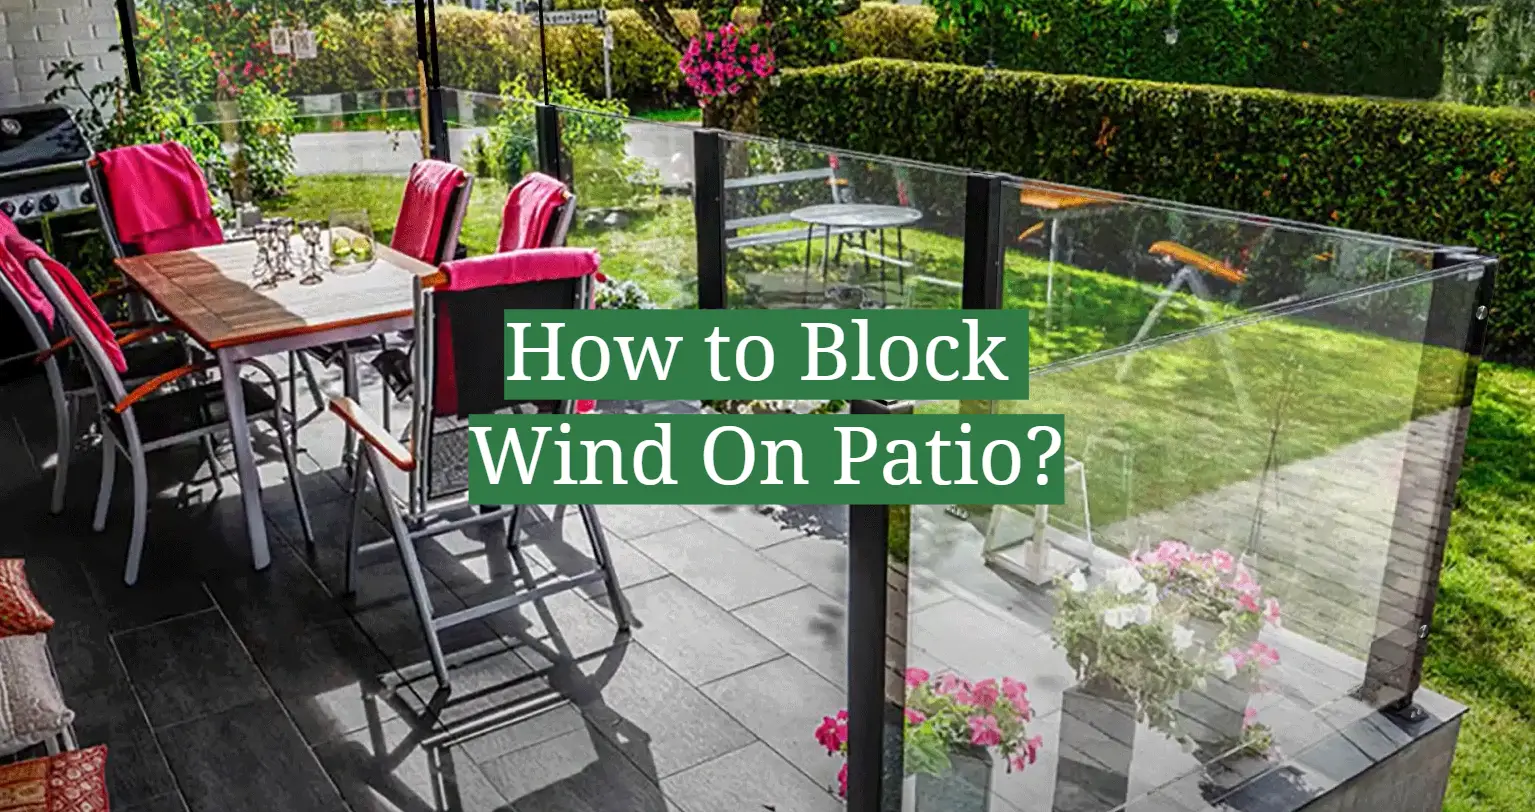 How to Block Wind On Patio?